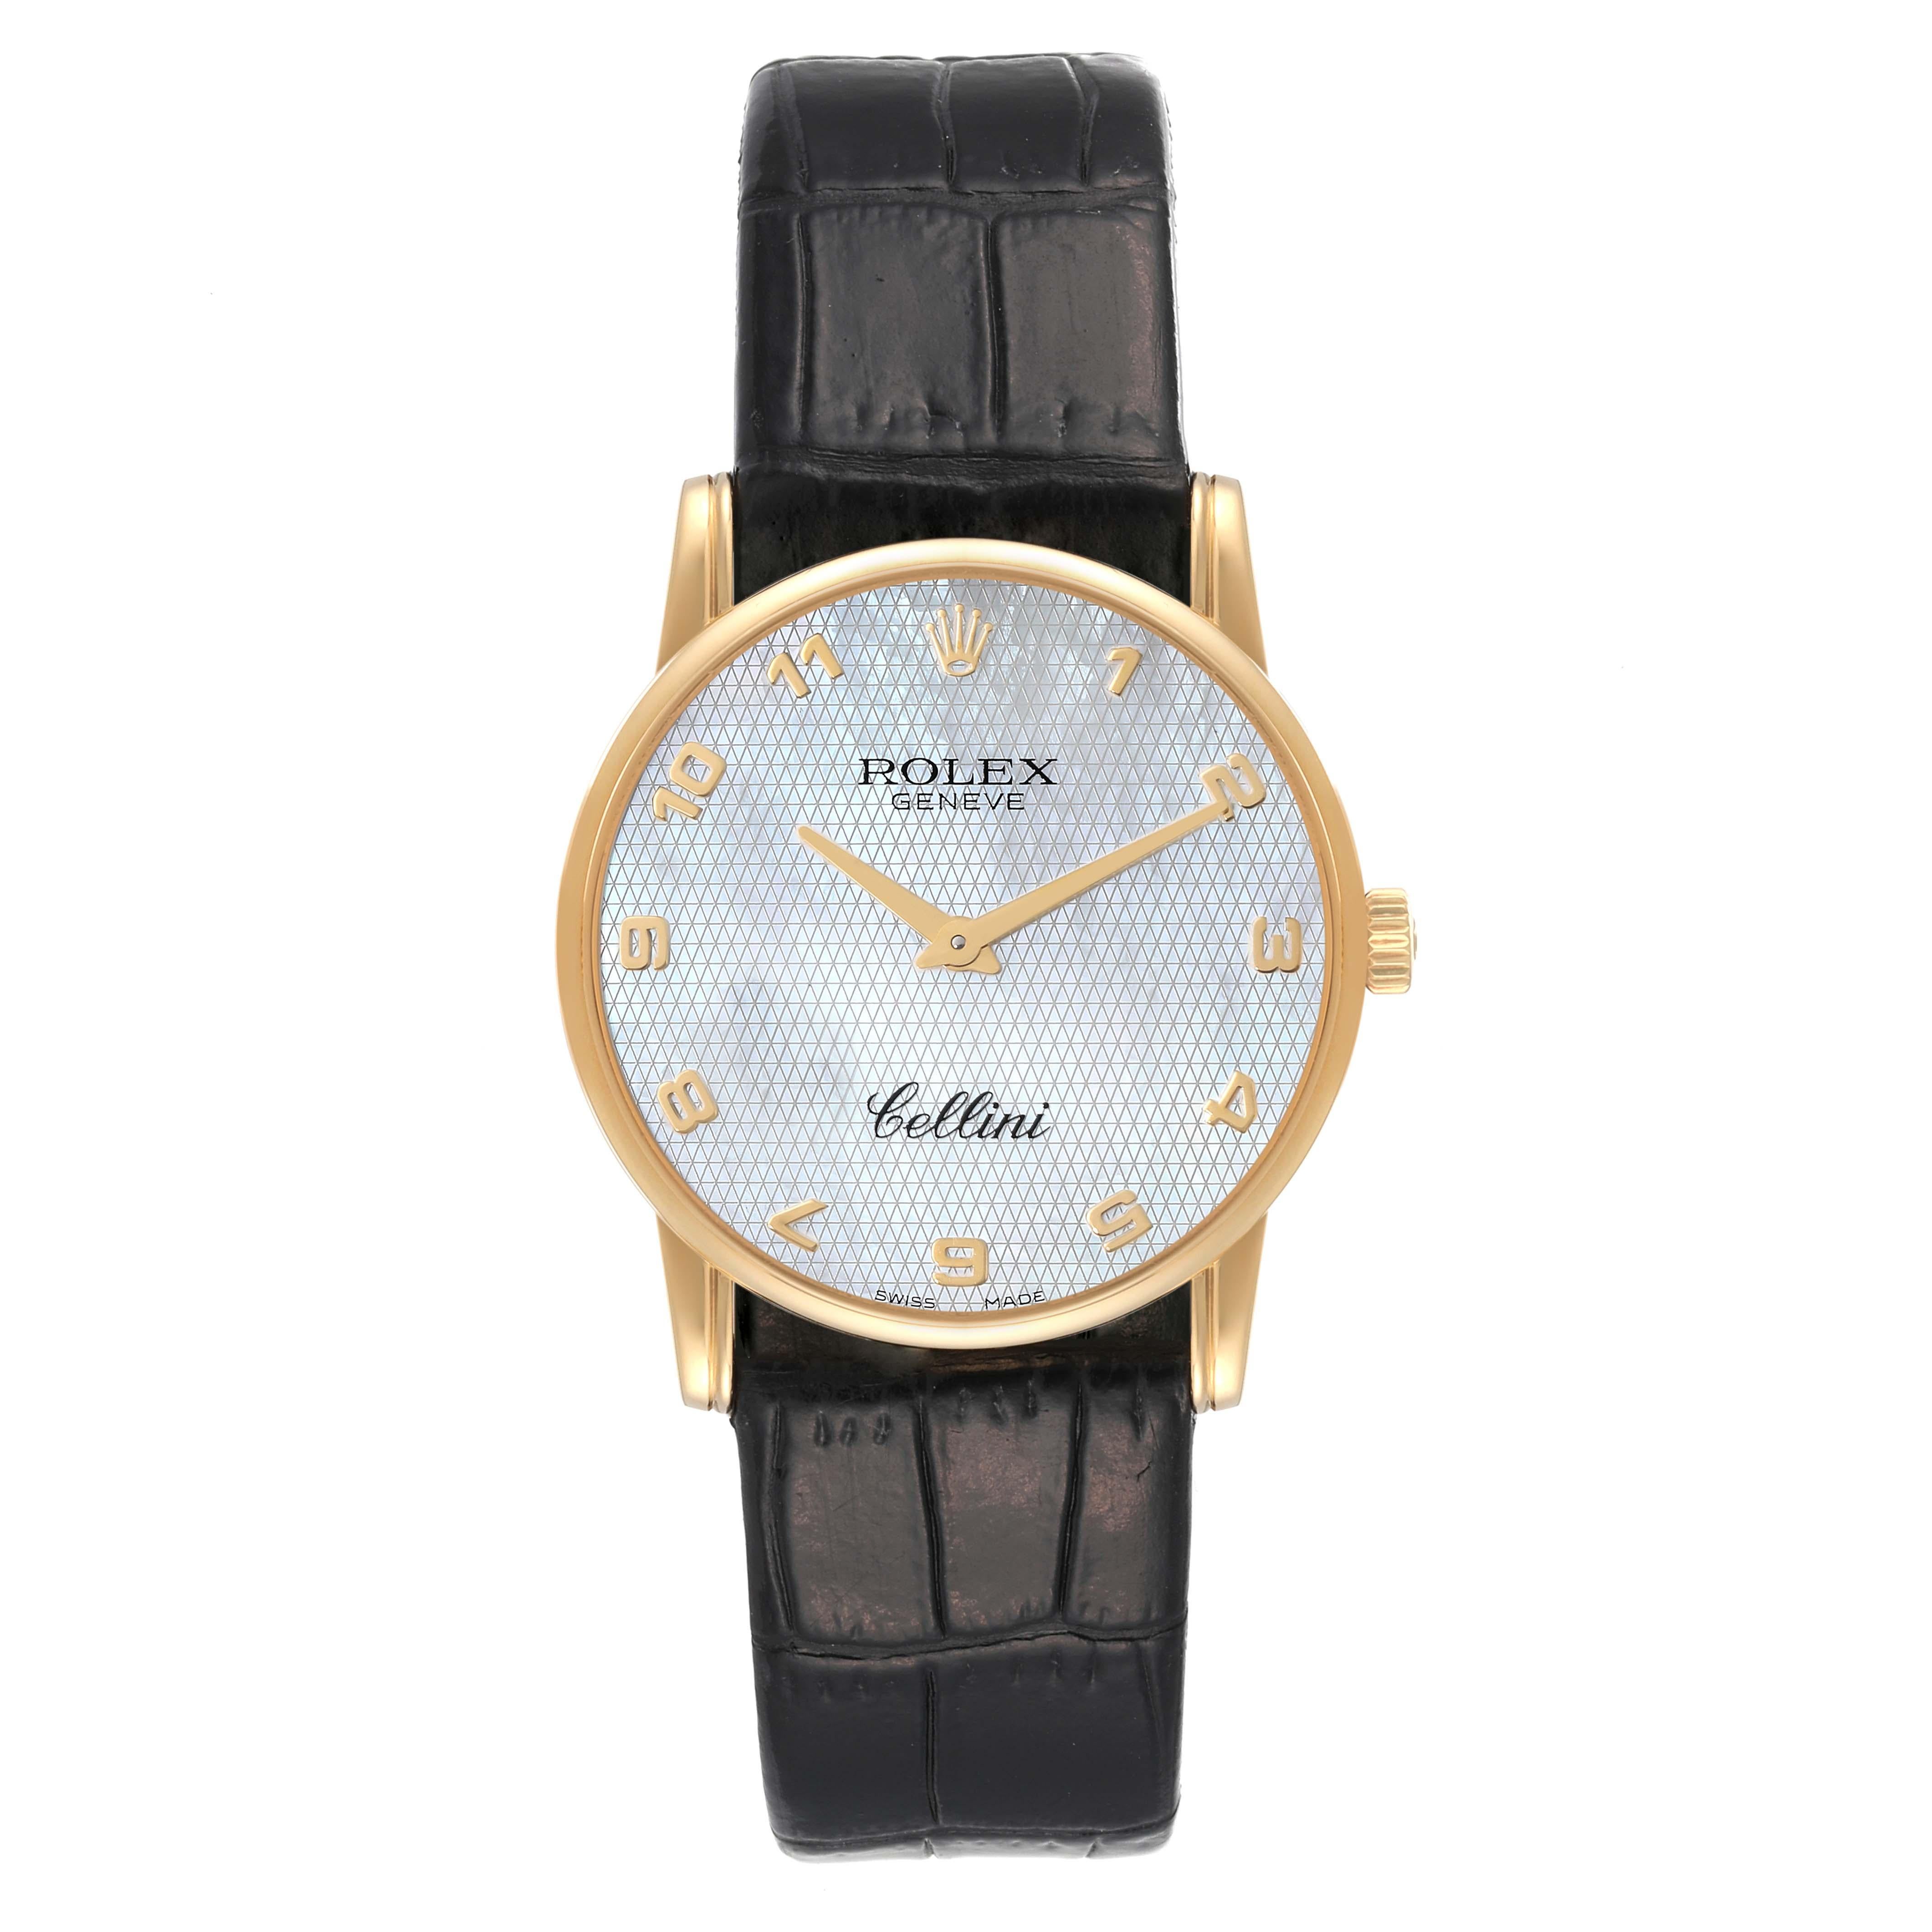 Rolex Cellini Classic Yellow Gold Mother of Pearl Dial Mens Watch 5116 Card. Manual winding movement. 18k yellow gold slim case 31.8 x 5.5 mm in diameter. Rolex logo on a crown. . Scratch resistant sapphire crystal. Flat profile. Textured mother of